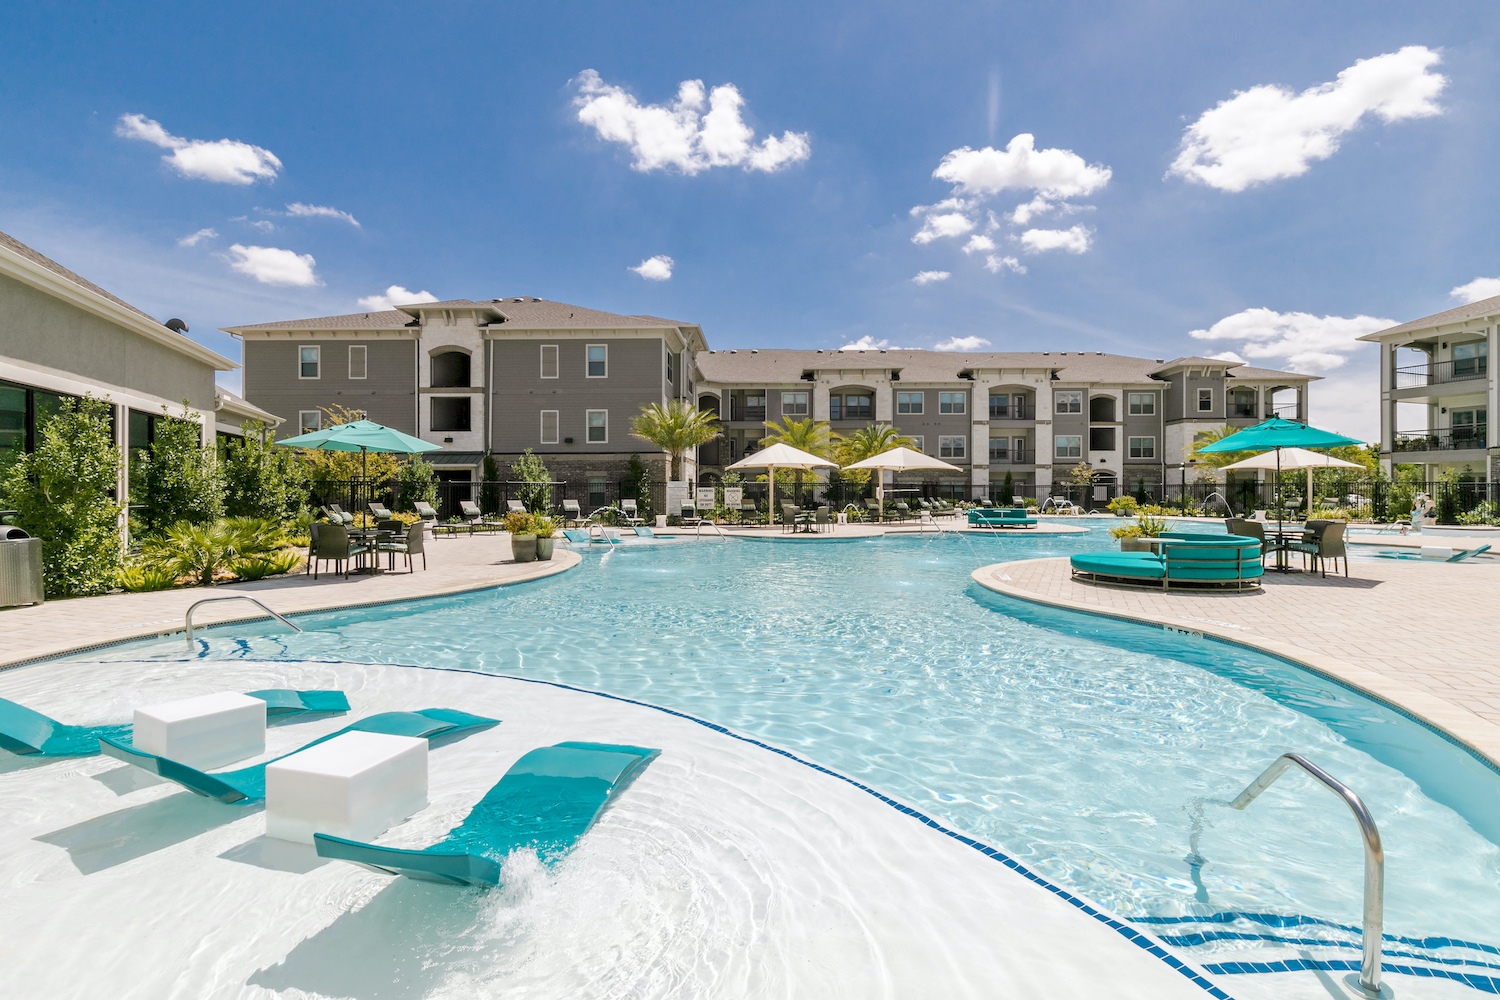 Core Pacific Advisors Fully Subscribes DST Offering of Texas Multifamily Property